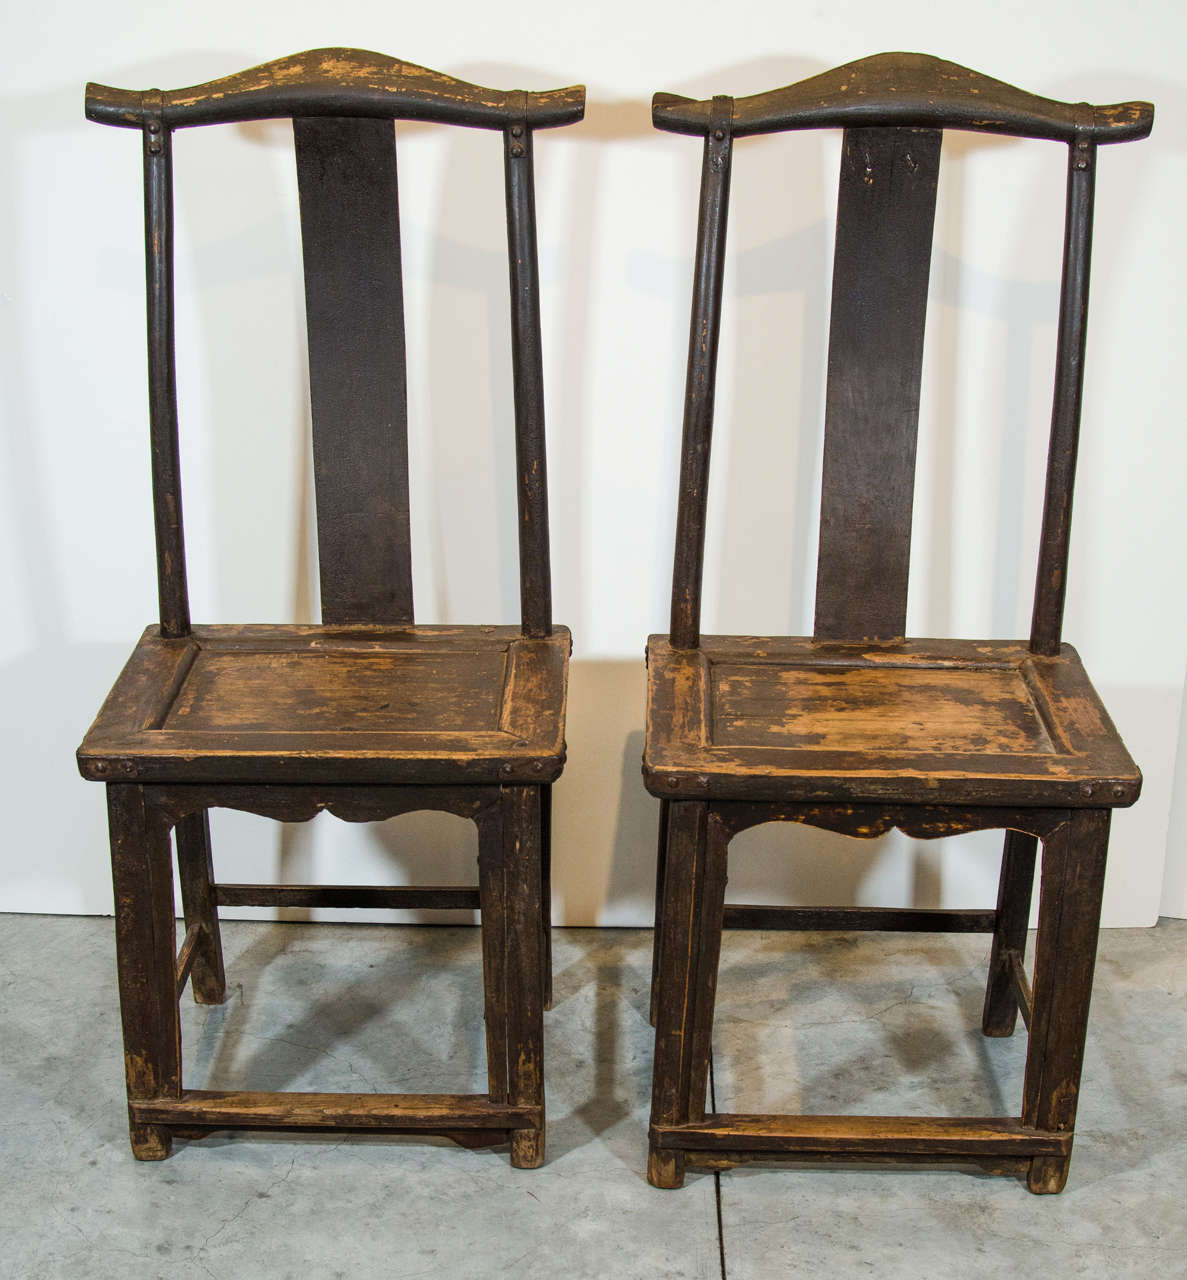 A pair of beautifully worn antique Chinese official's hat chairs with classic lines and original iron straps on back and seat. From Shanxi Province, circa 1880.
CH360.